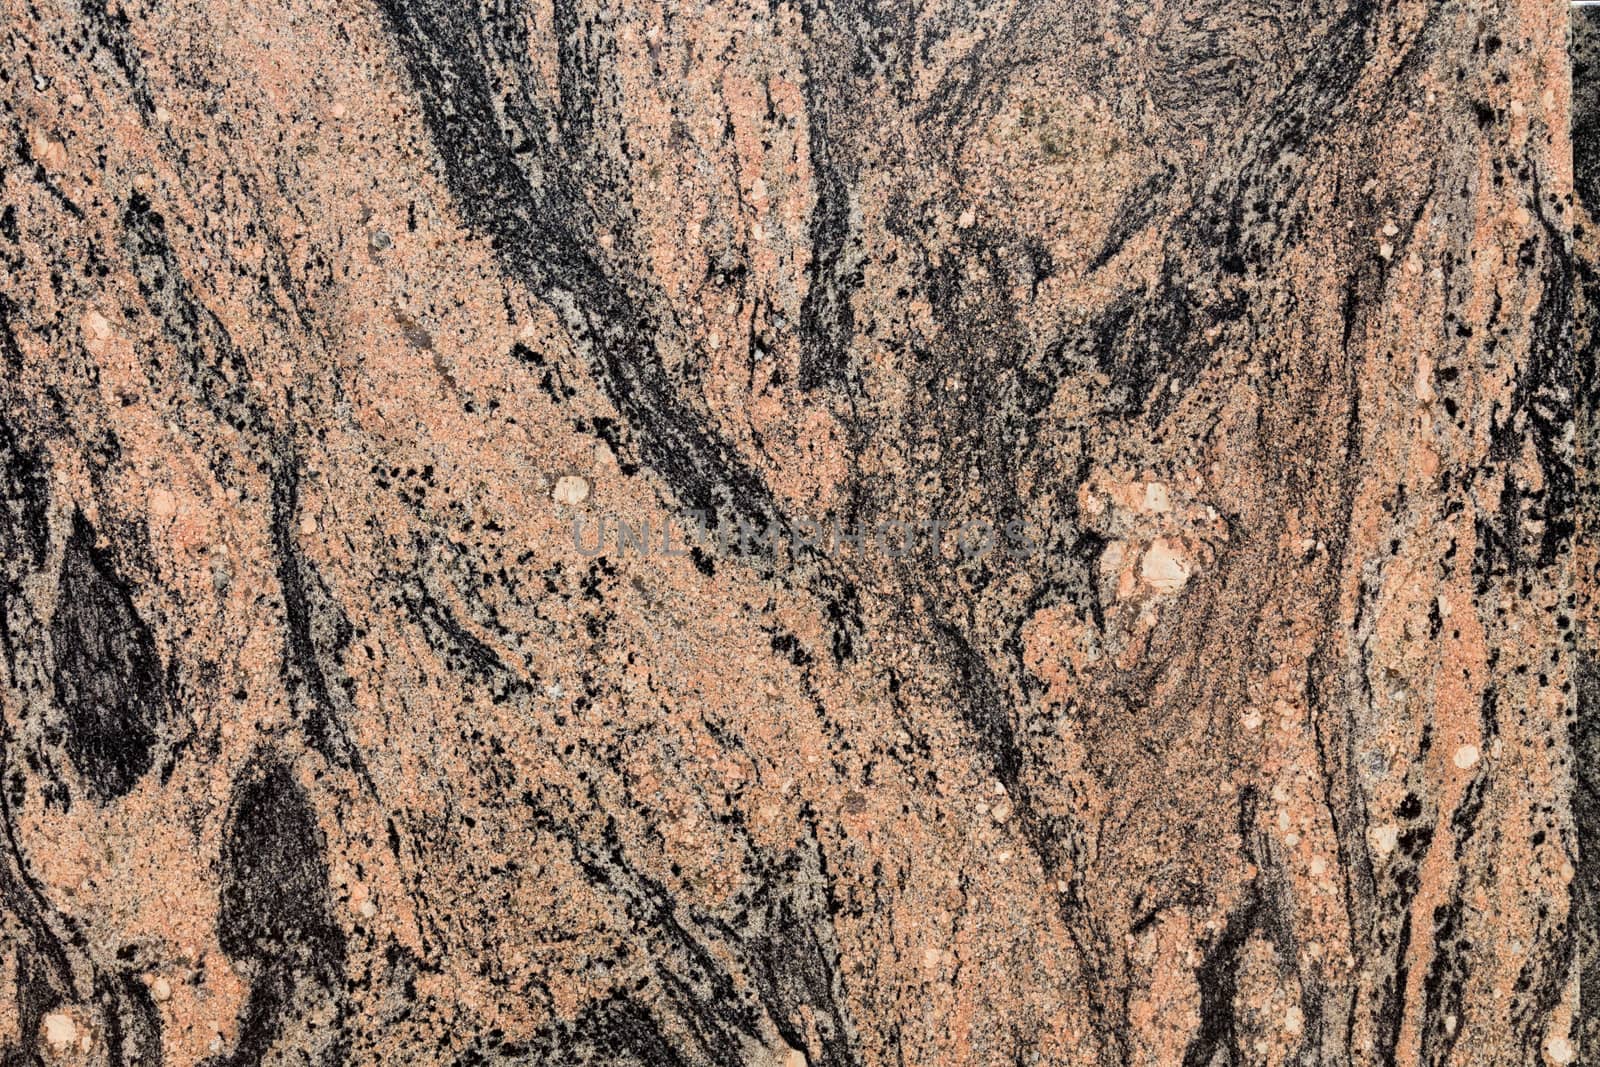 Close up view of a polished granite slab.